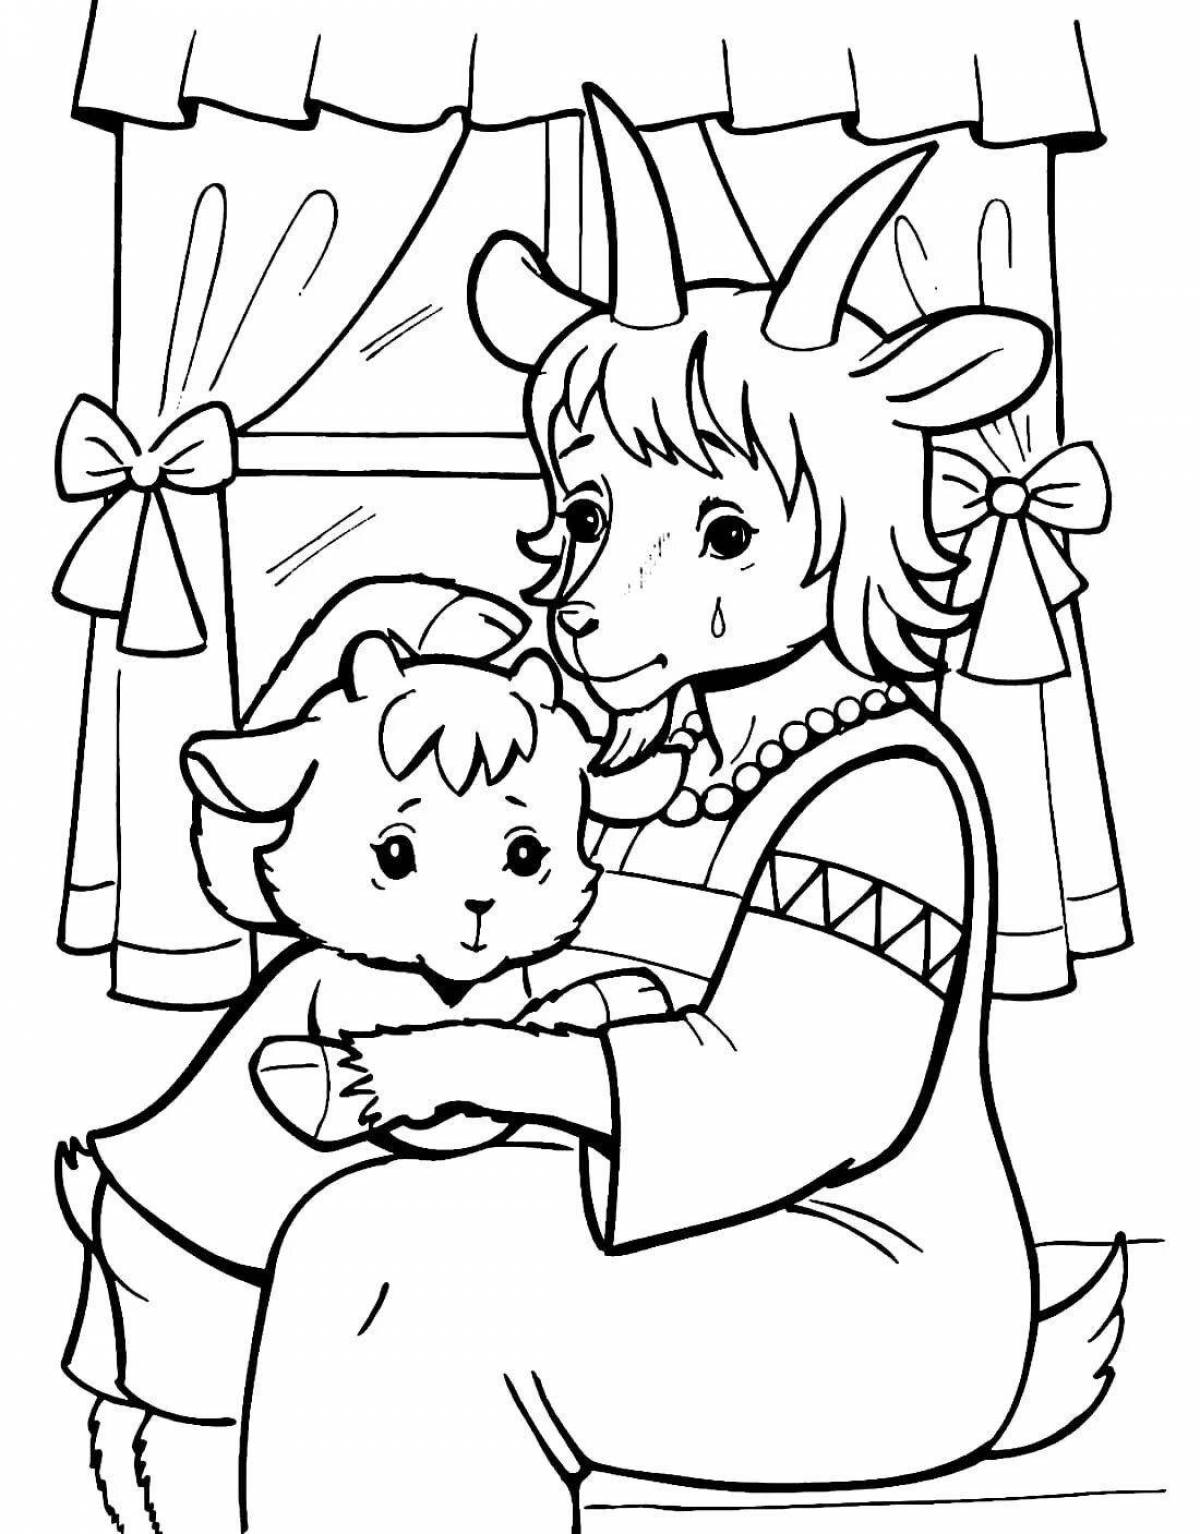 Russian fairy tale coloring pages